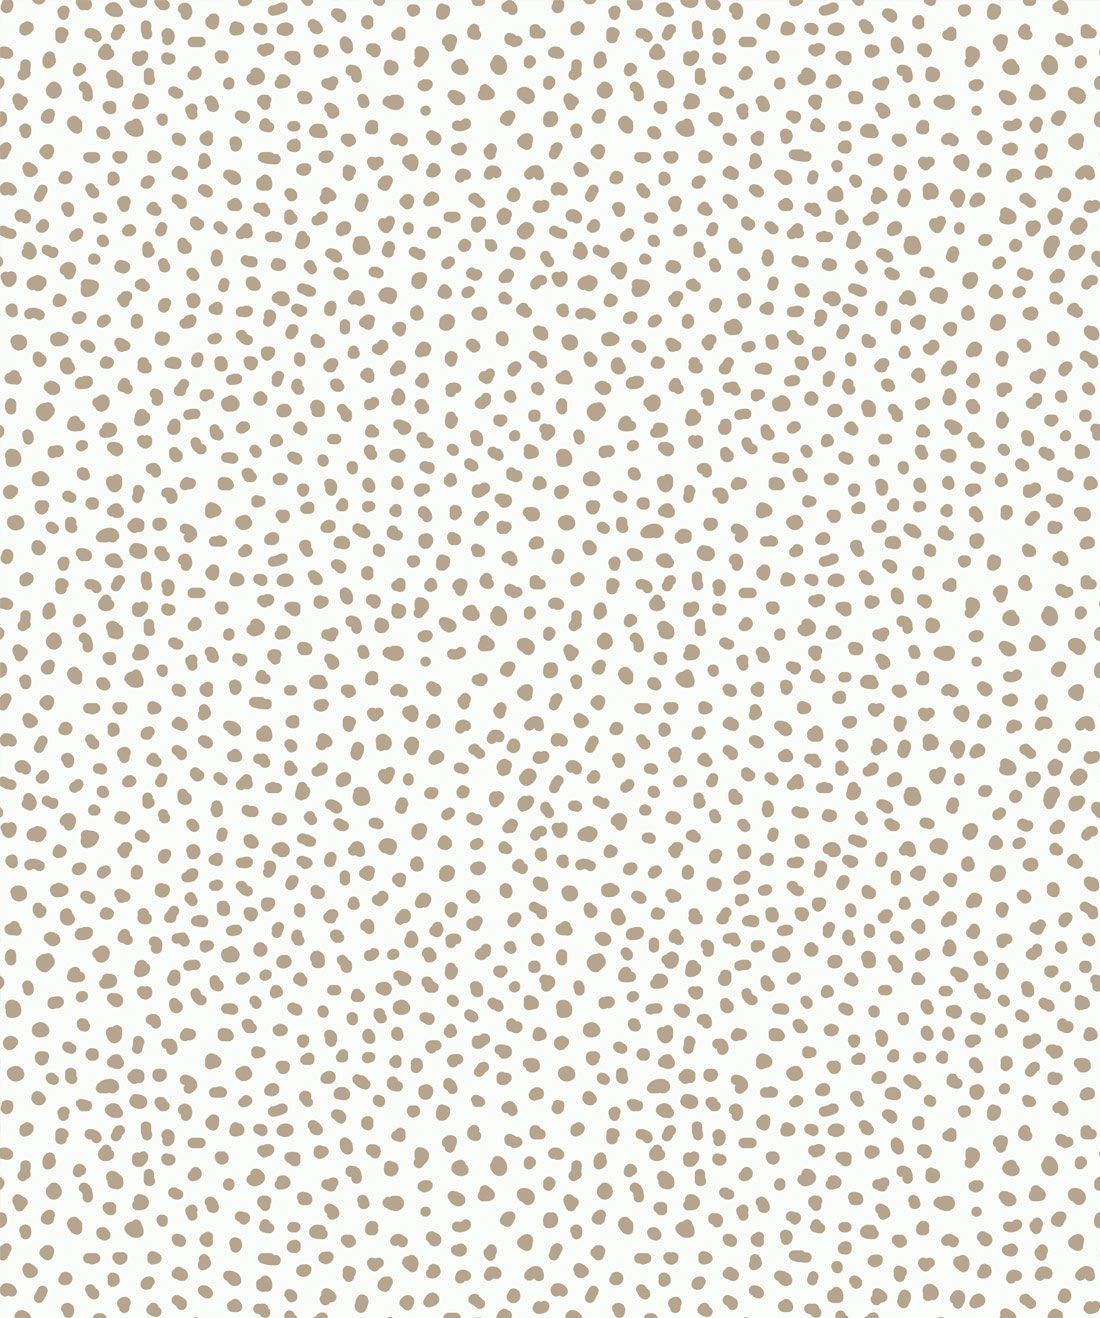 Huddy's Dots • Taupe • Spotted Wallpaper • Swatch